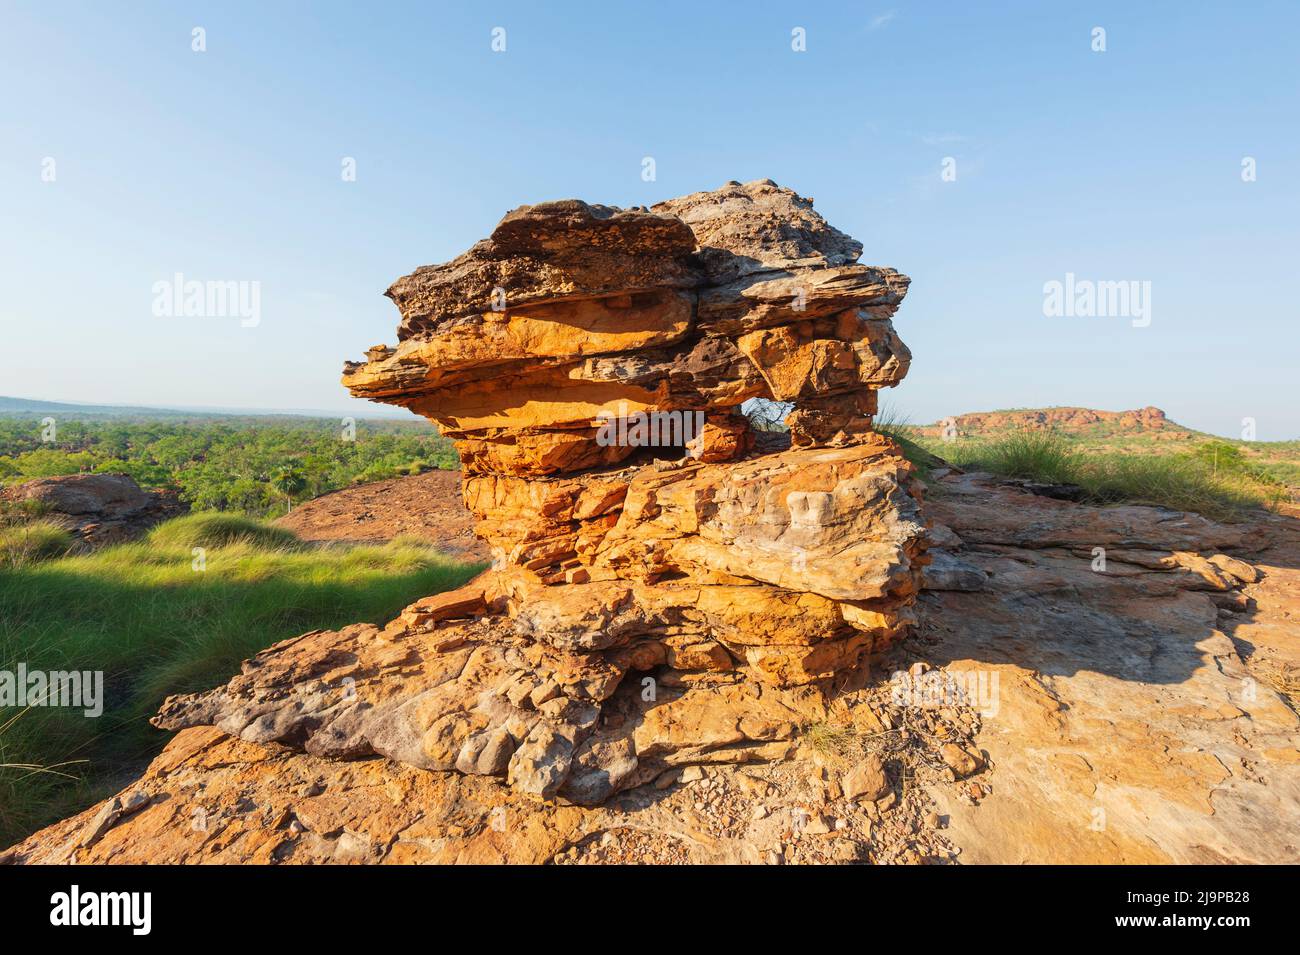 Amazing shape of eroded sandstone landform in Keep River National Park, a popular tourist destination, Northern Territory, NT, Australia Stock Photo